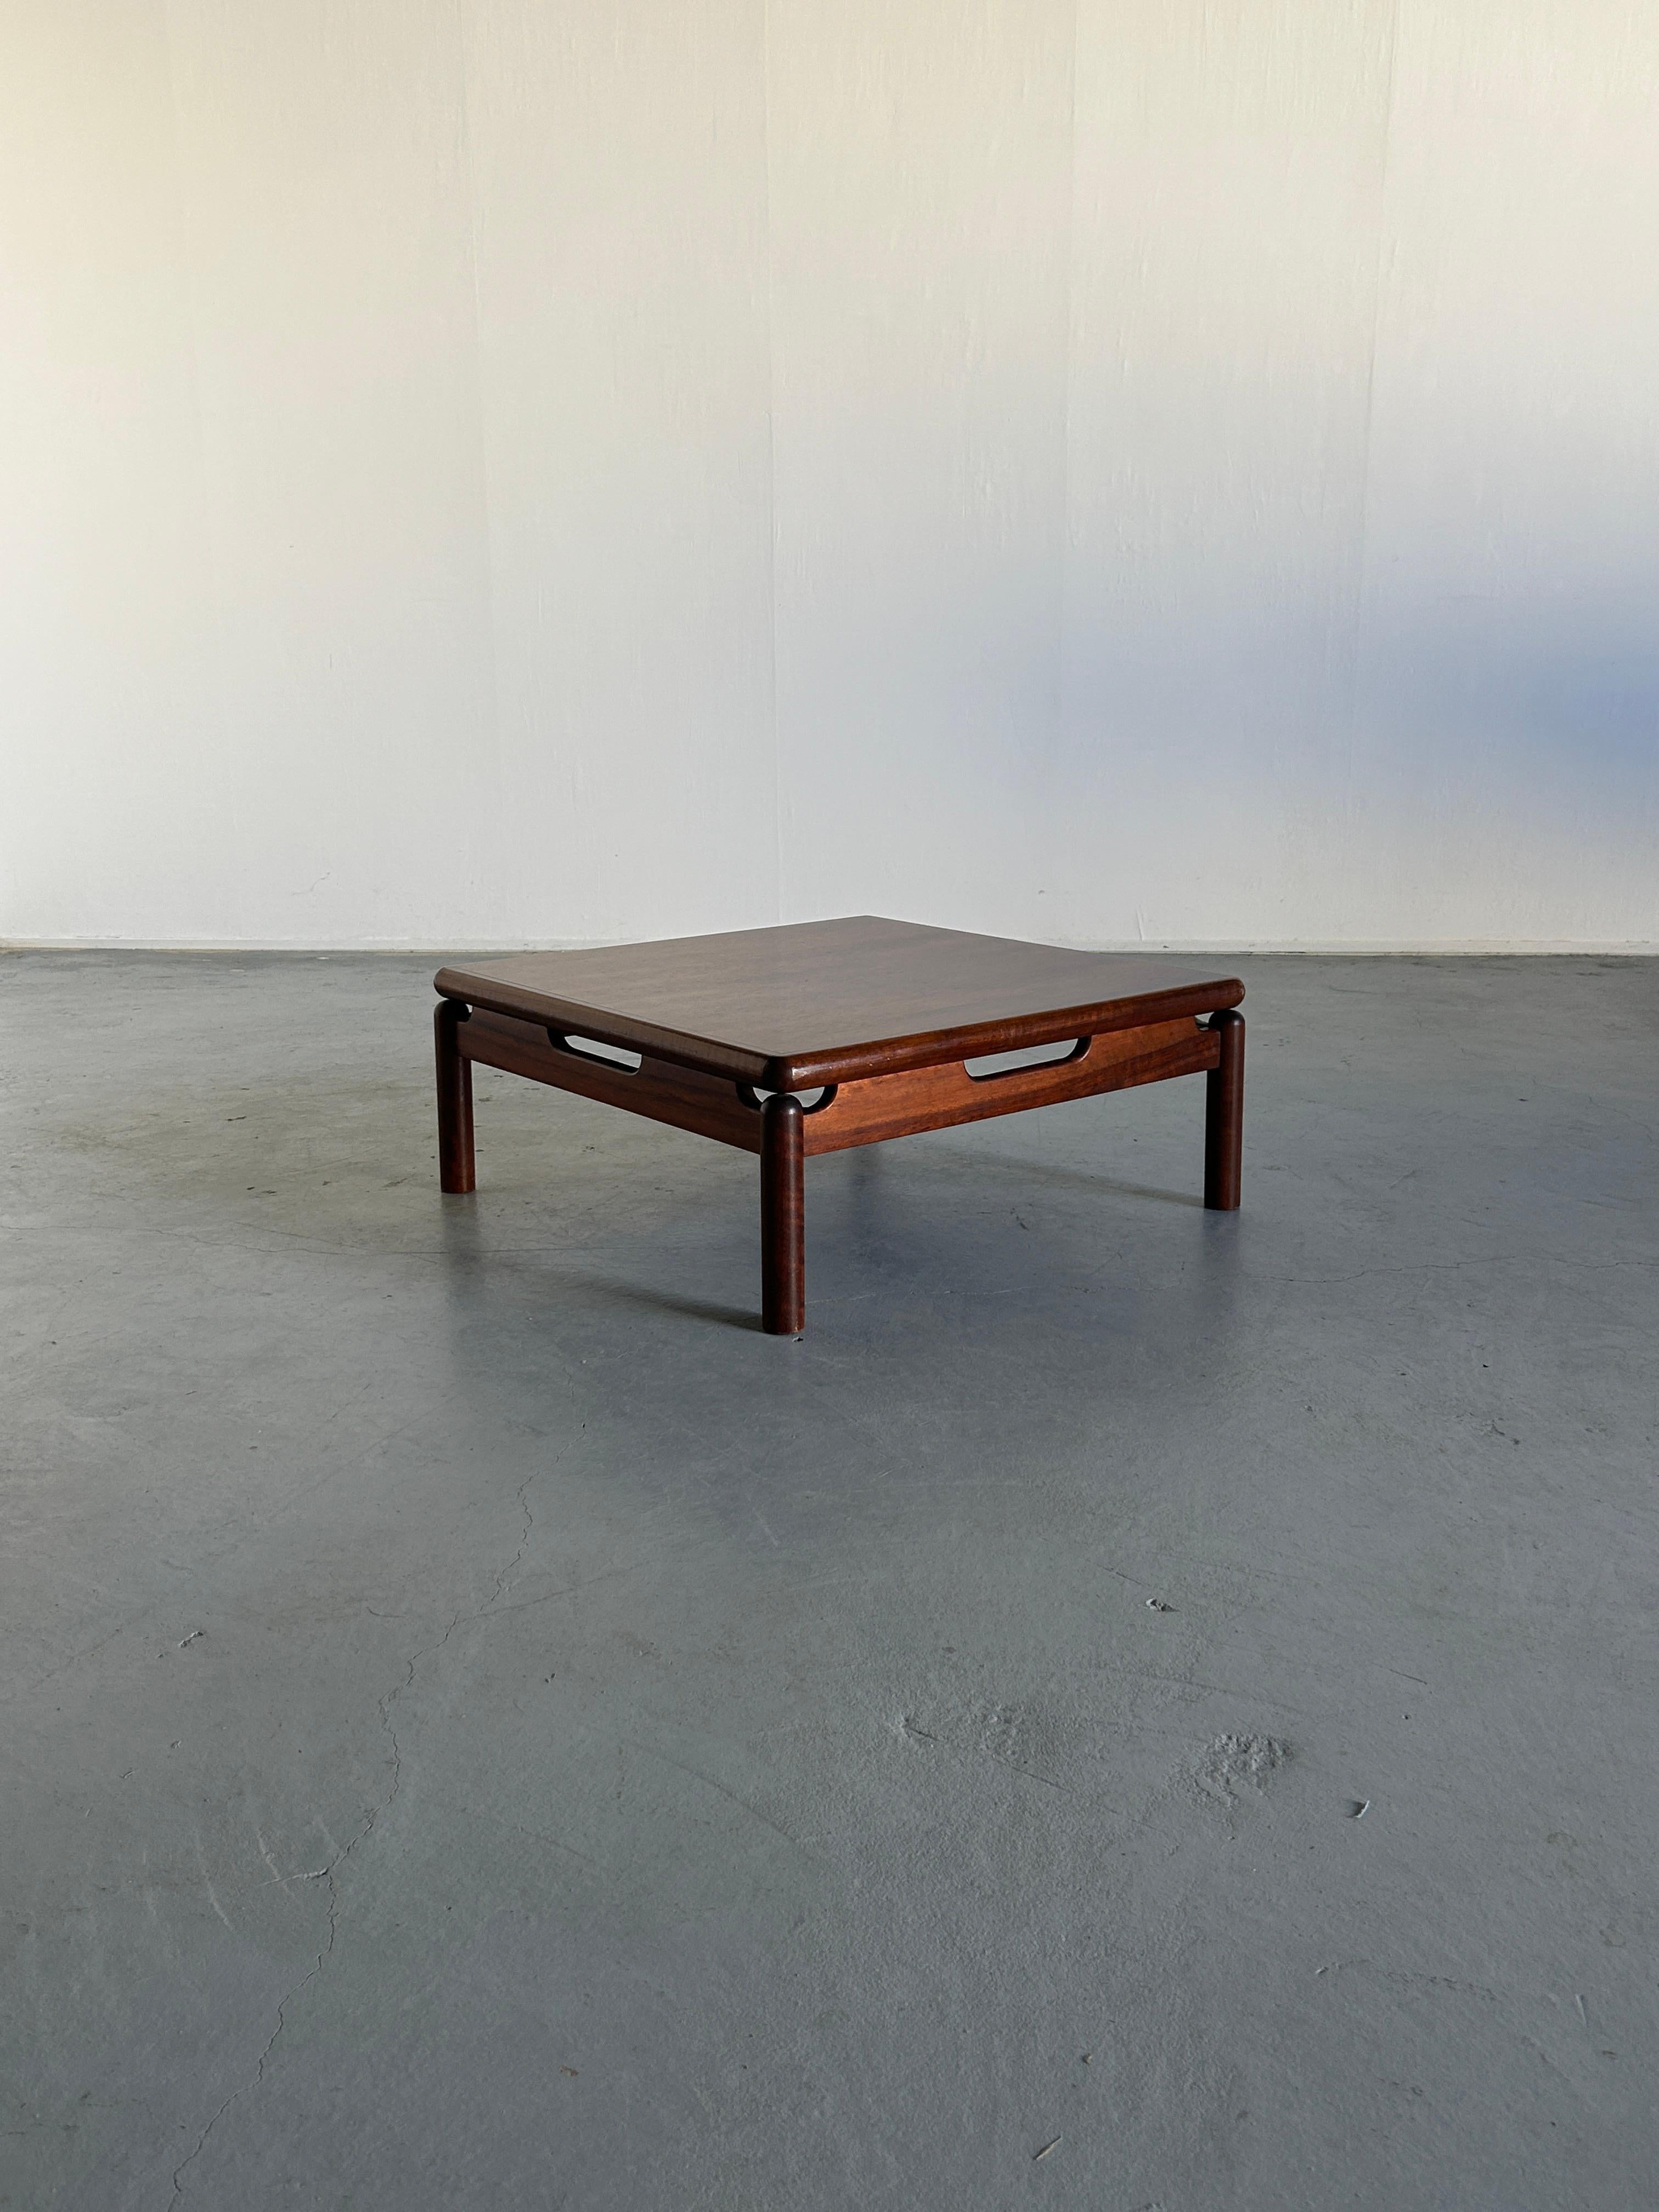 A beautiful and elegant rosewood coffee table or club table, produced by Opal Möbel in the early 1970s in Germany.
Scandinavian Mid-Century-Modern style and era.
Original label.

A perfect central or side piece of any Mid-Century or modernist